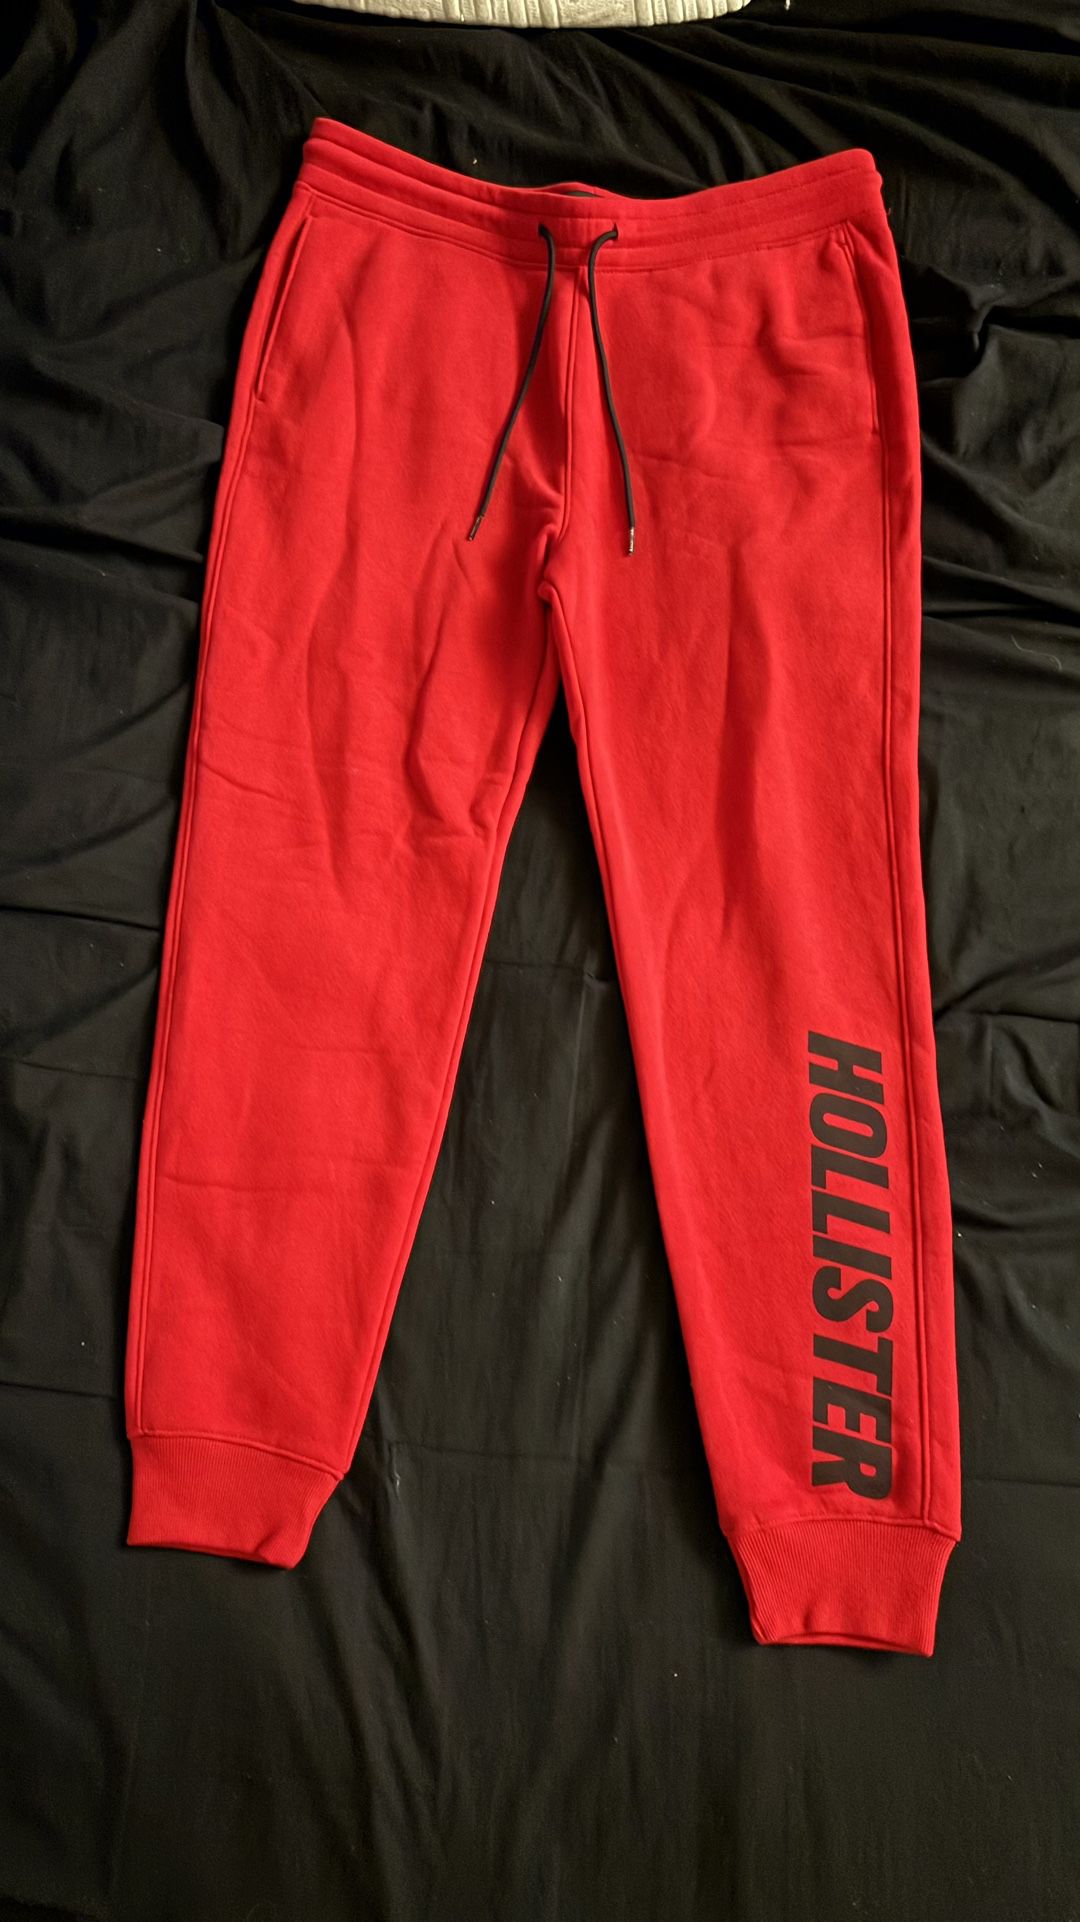 Hollister Red Sweatpants